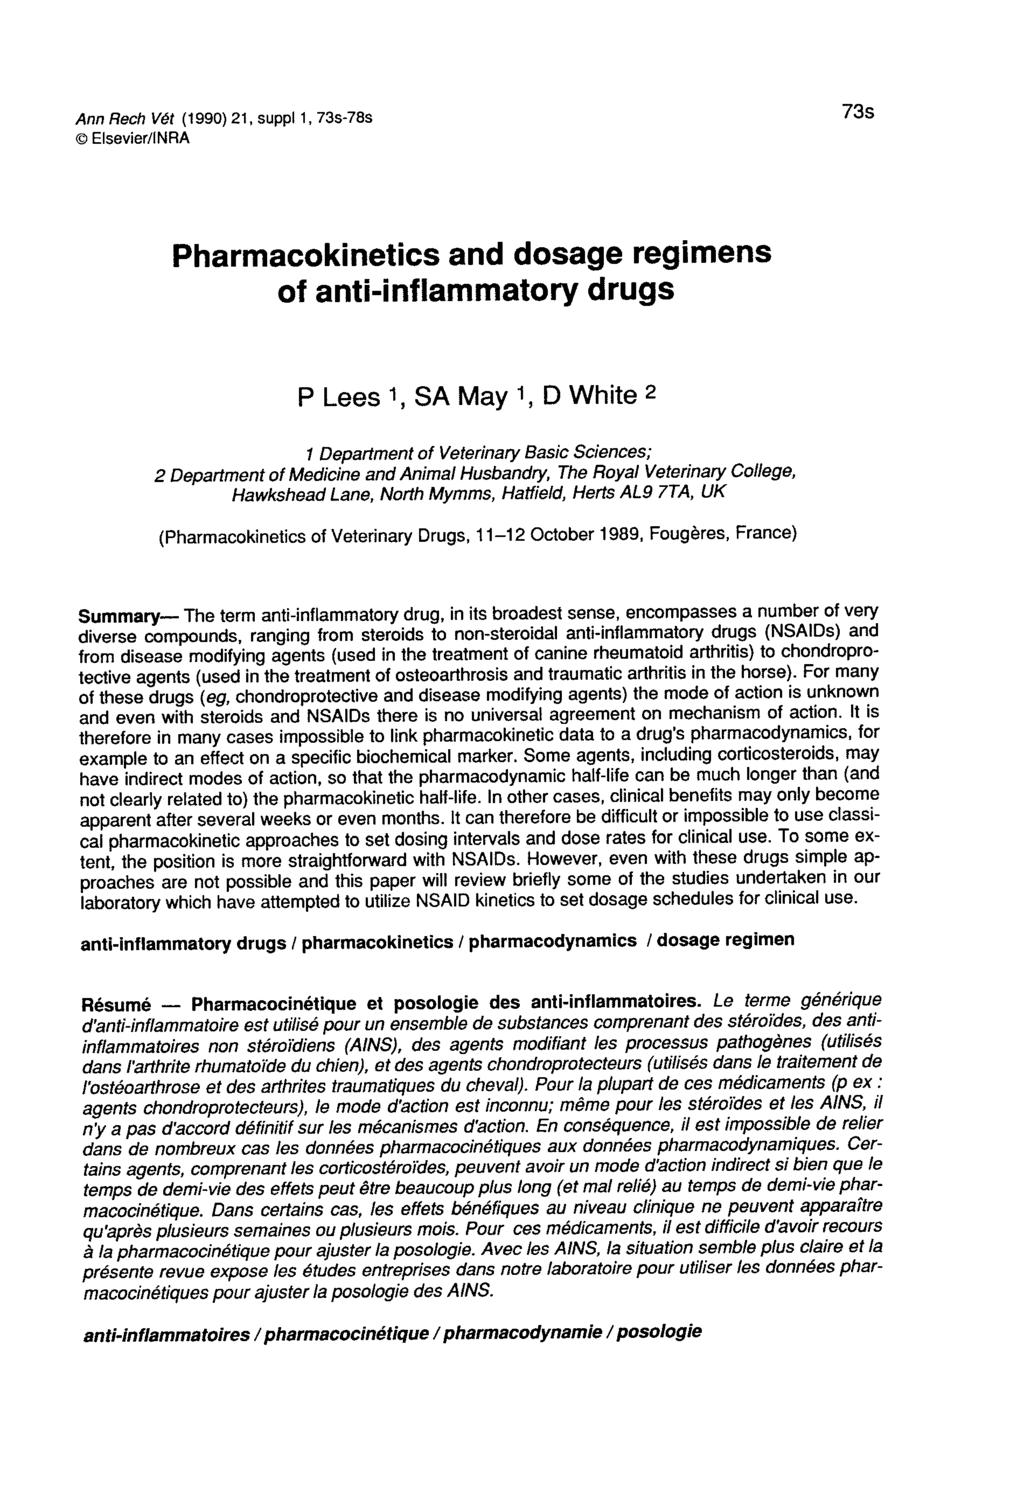 Pharmacokinetics and dosage regimens of anti-inflammatory drugs P Lees SA May D White 1 Department of Veterinary Basic Sciences; 2 Department of Medicine and Animal Husbandry, The Royal Veterinary